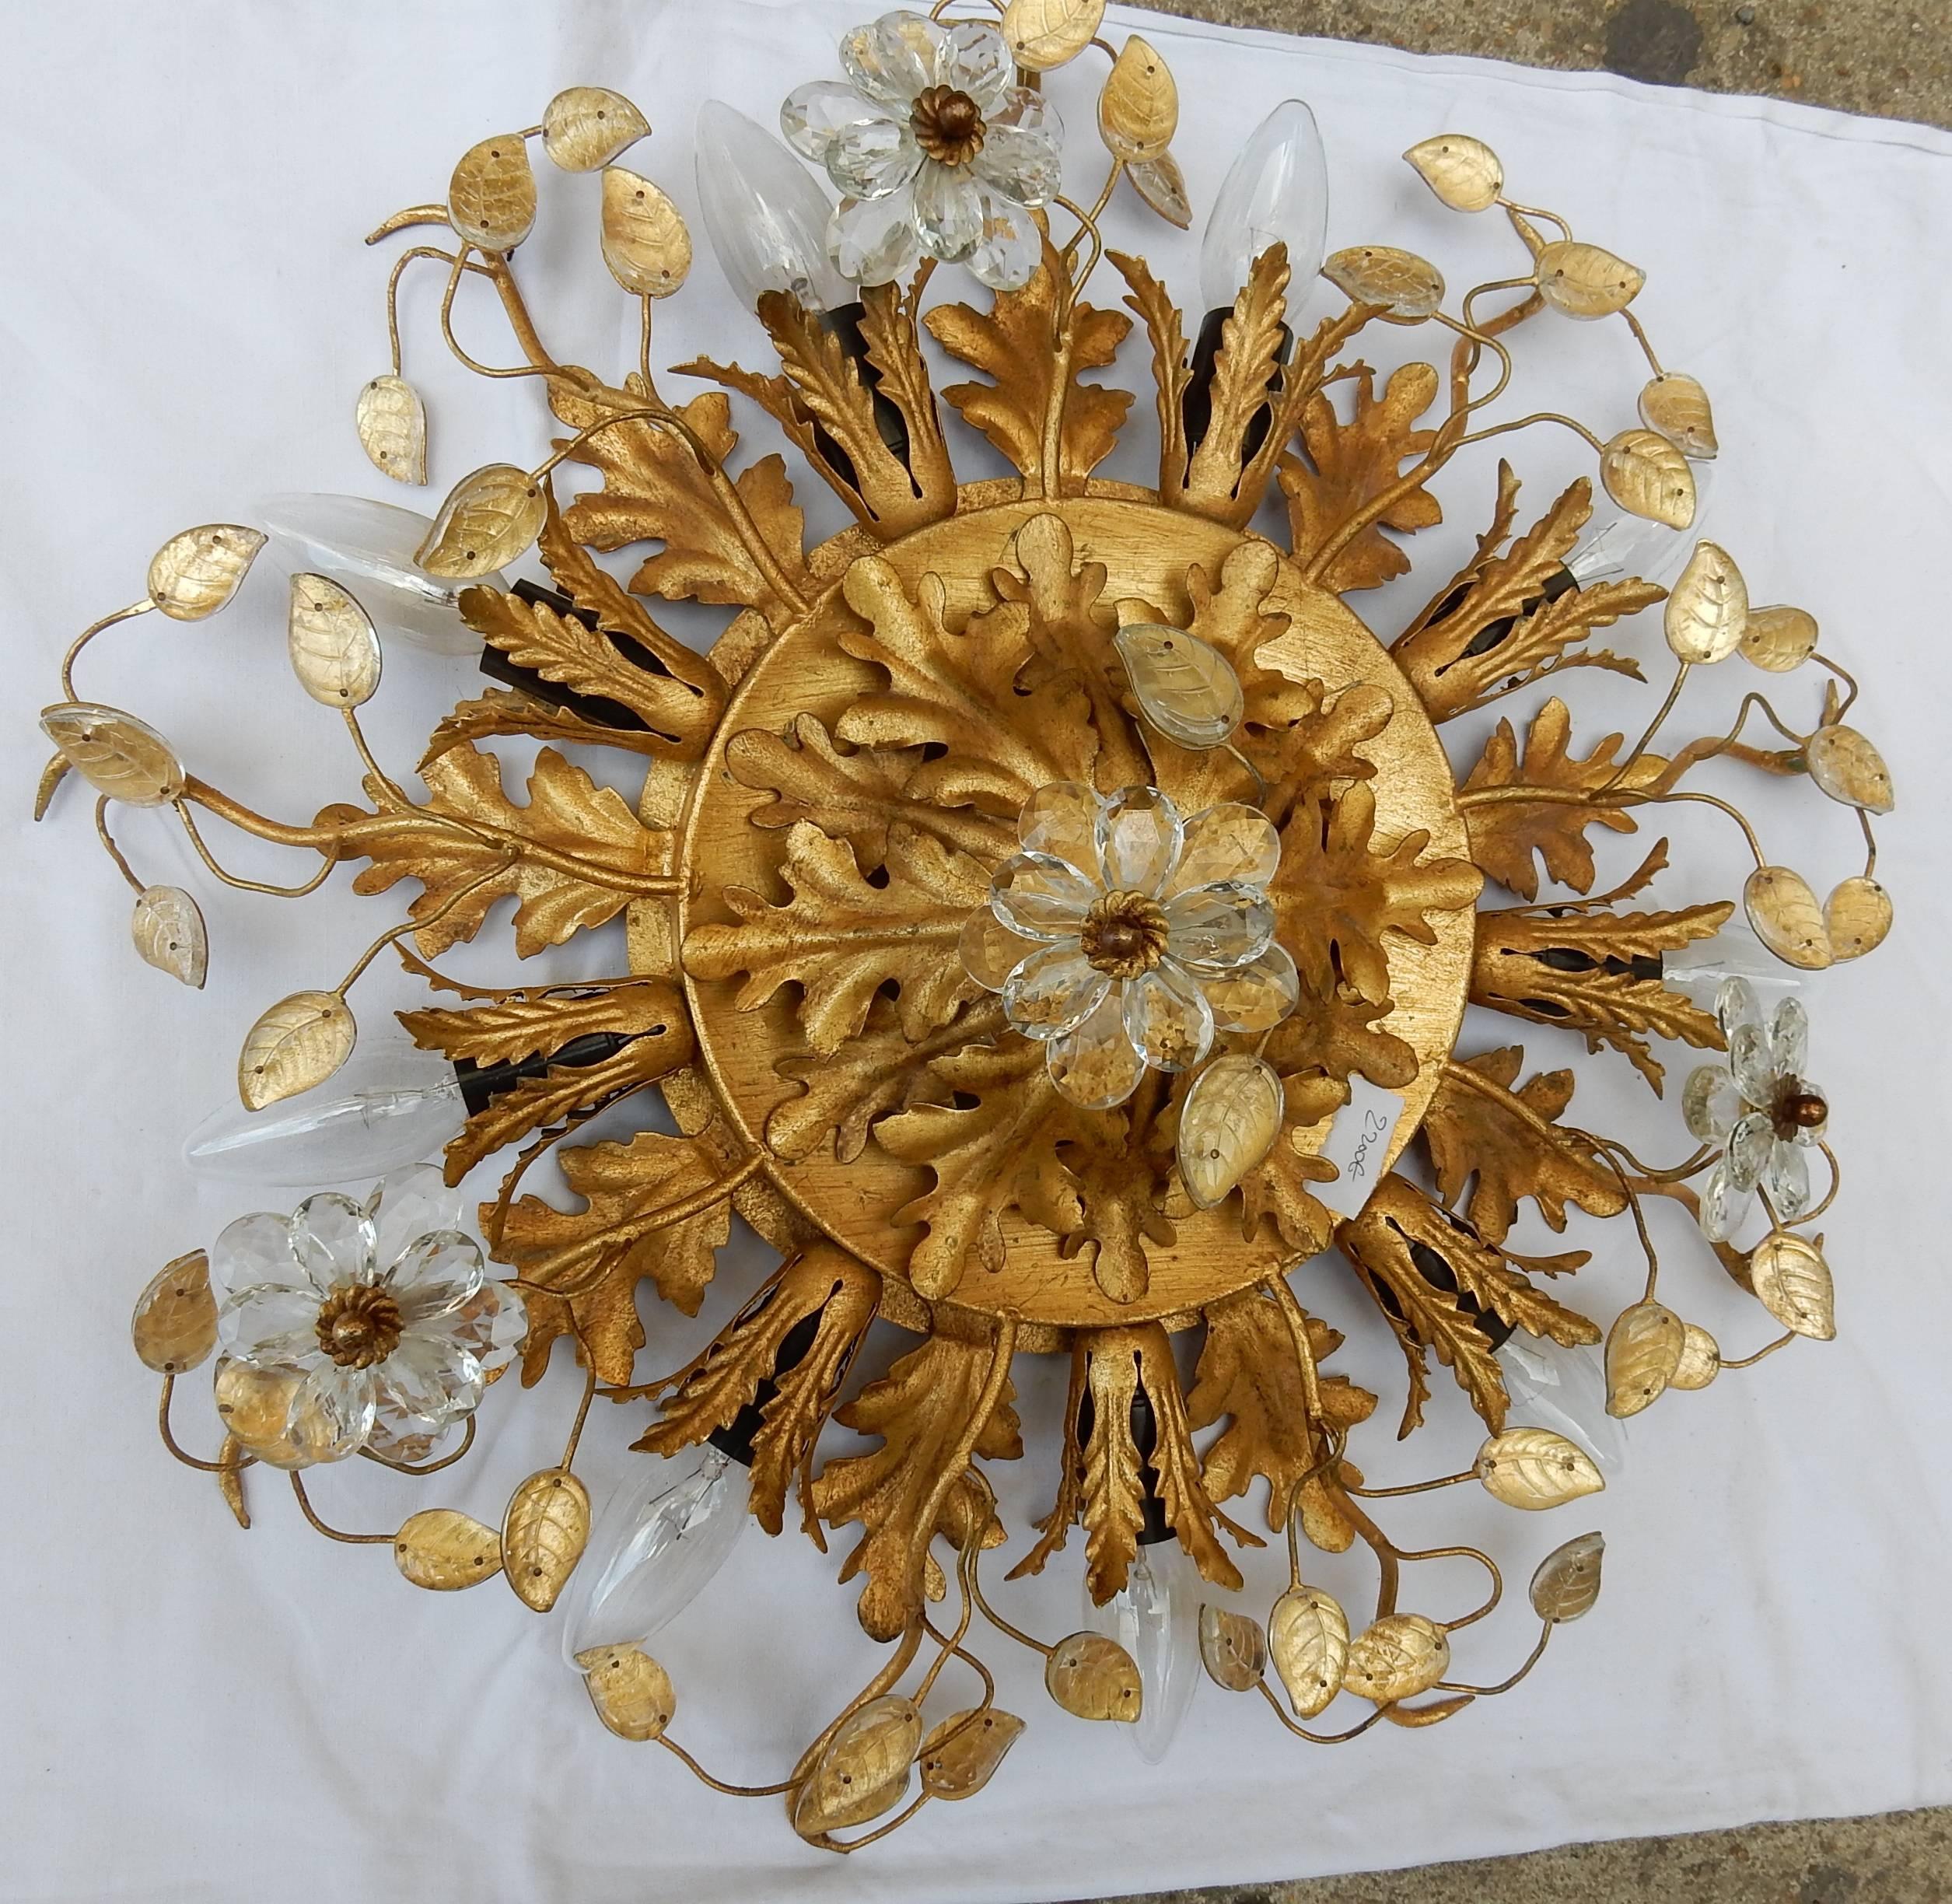 1950-1970 Ceiling Light Has Floral Decoration in the Style of Maison Baguès 1